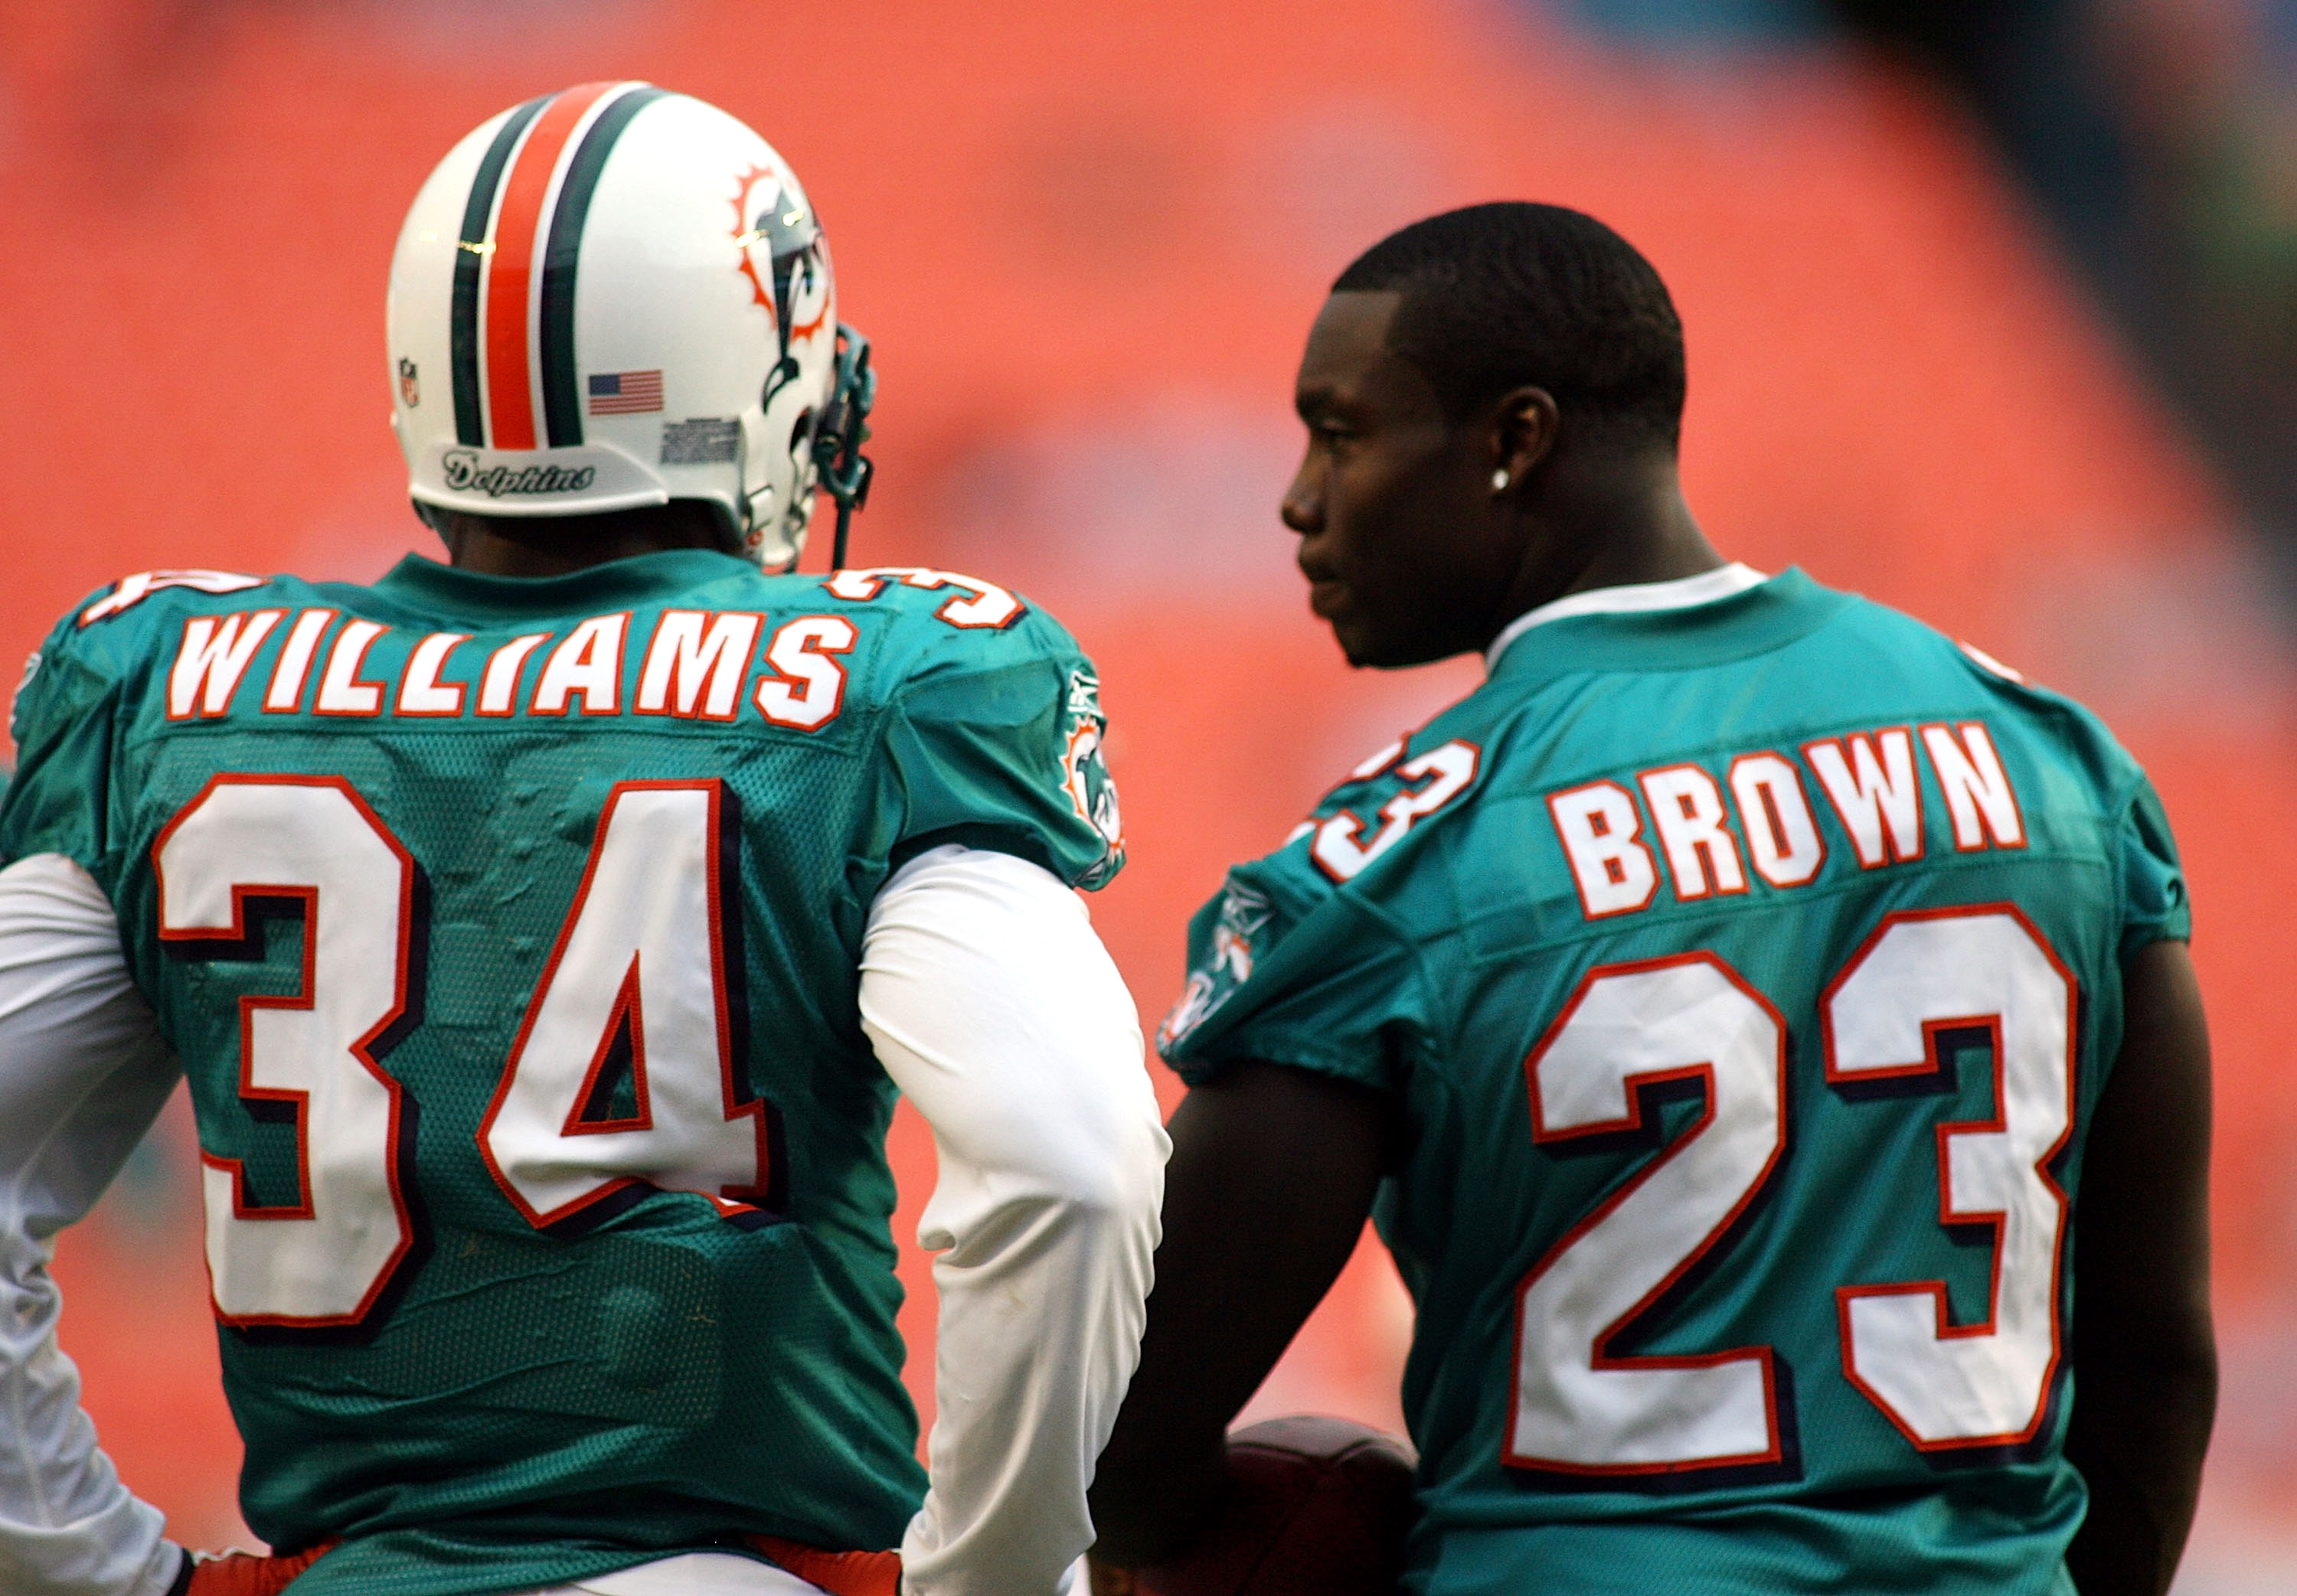 miami dolphins brown jersey